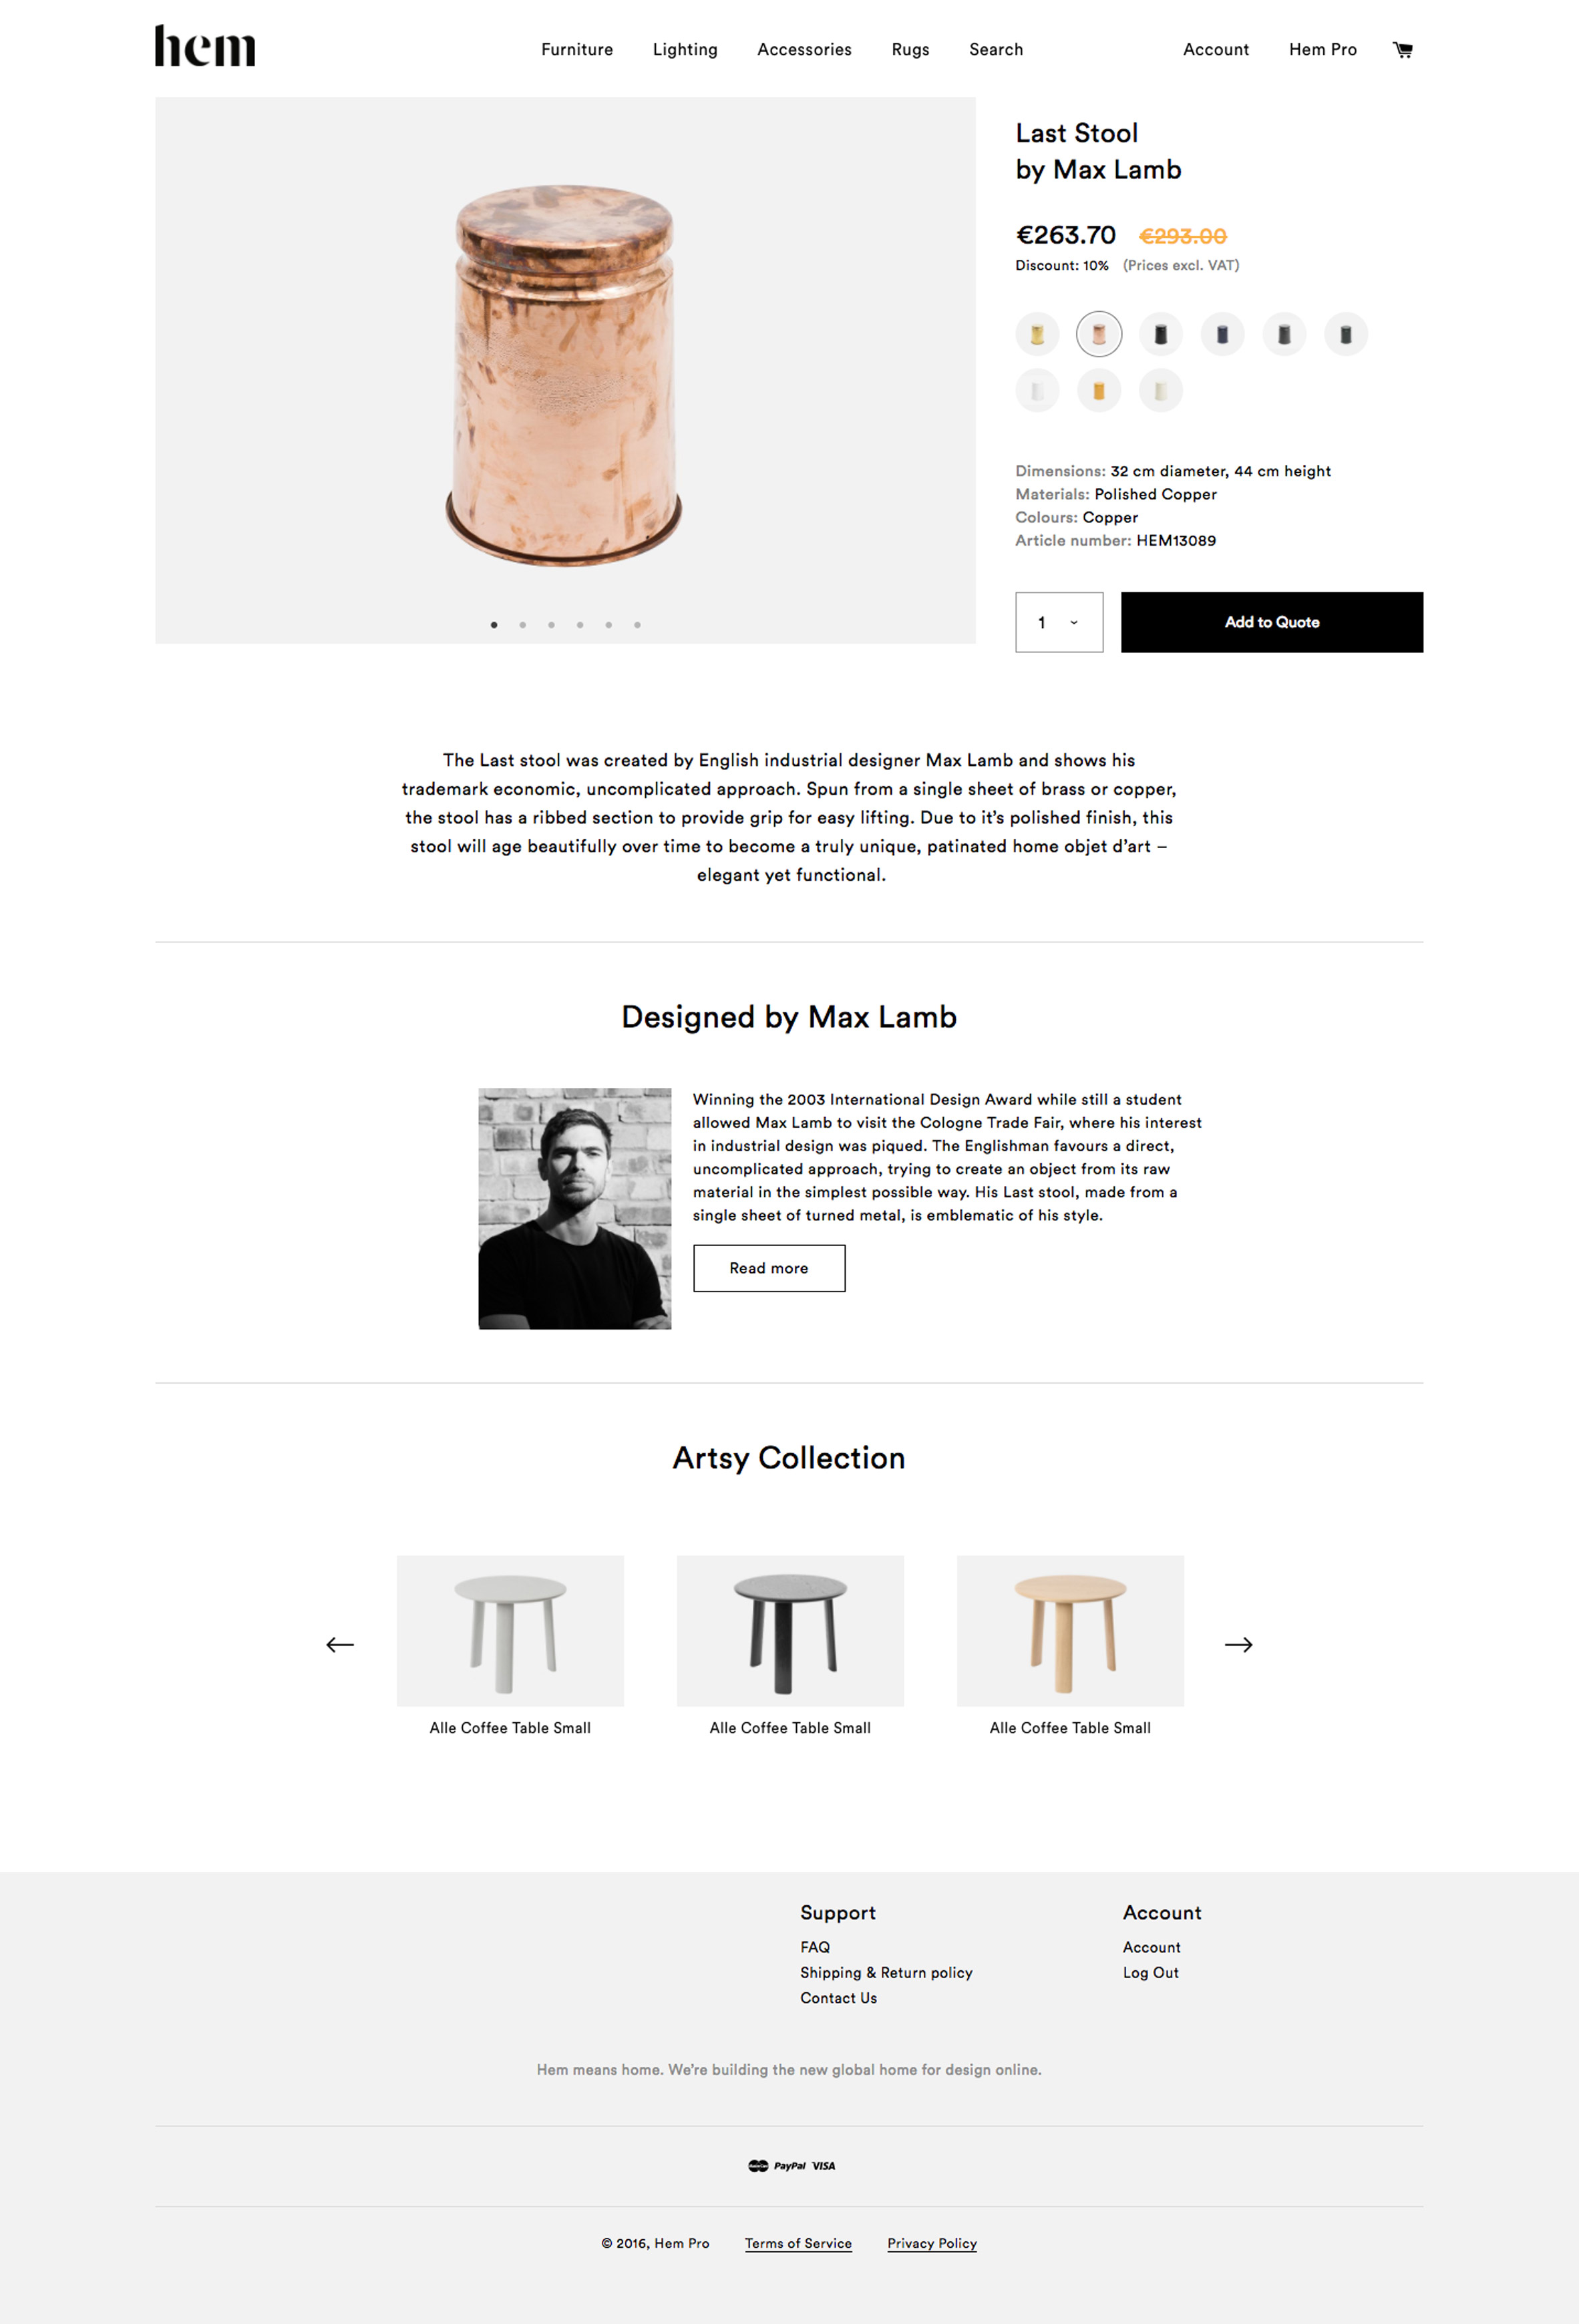 Hem launches e-commerce site especially for designers and architects